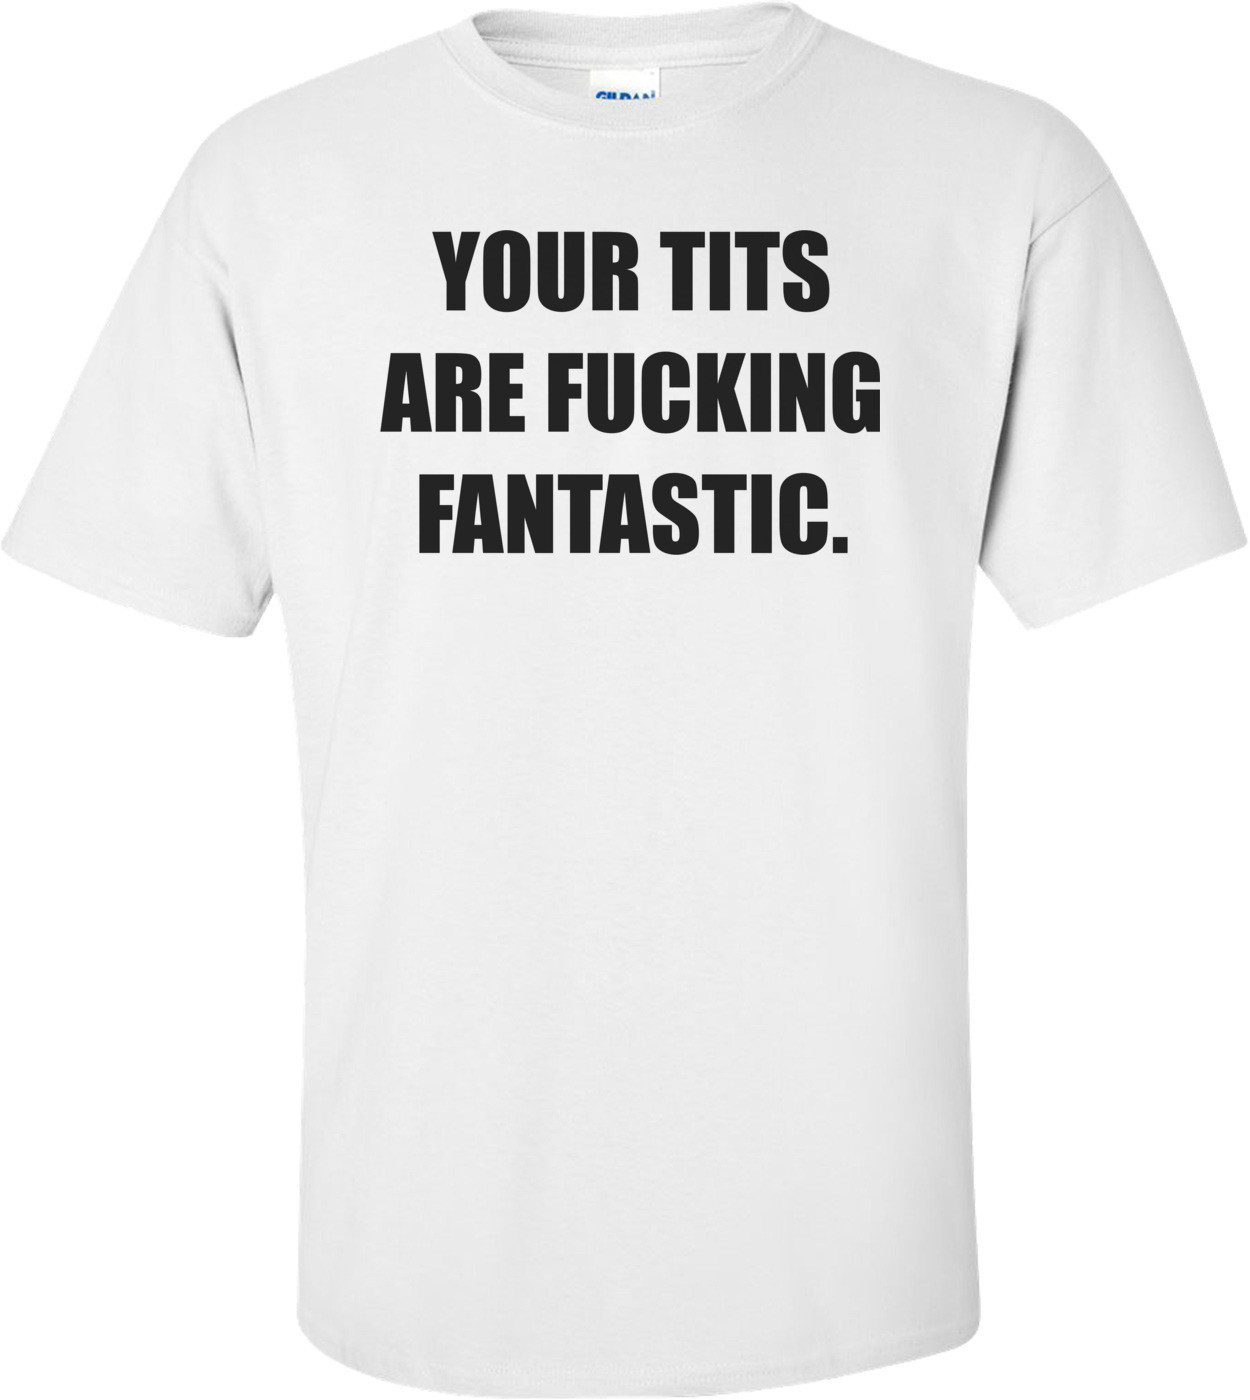 YOUR TITS ARE FUCKING FANTASTIC. Shirt